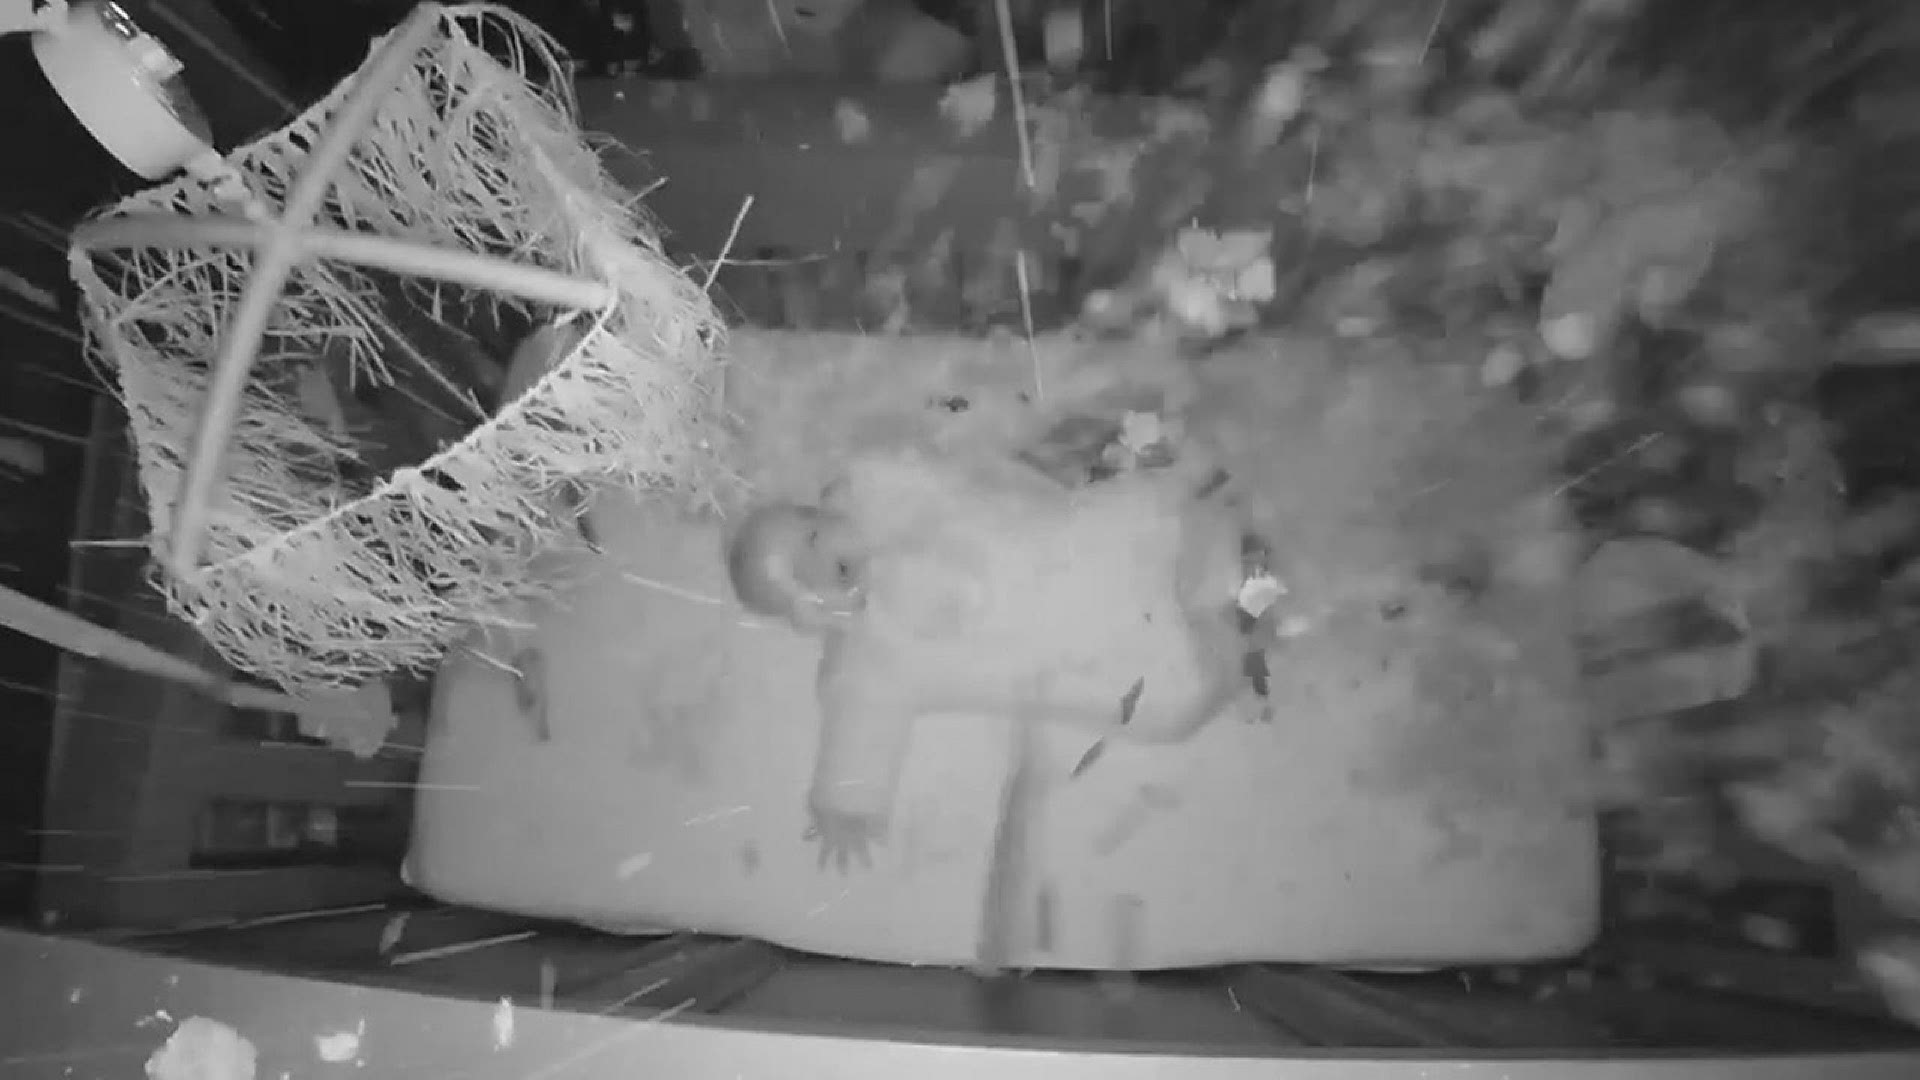 A baby monitor captured the moment a tree crashed into a home, sending debris on a sleeping baby.